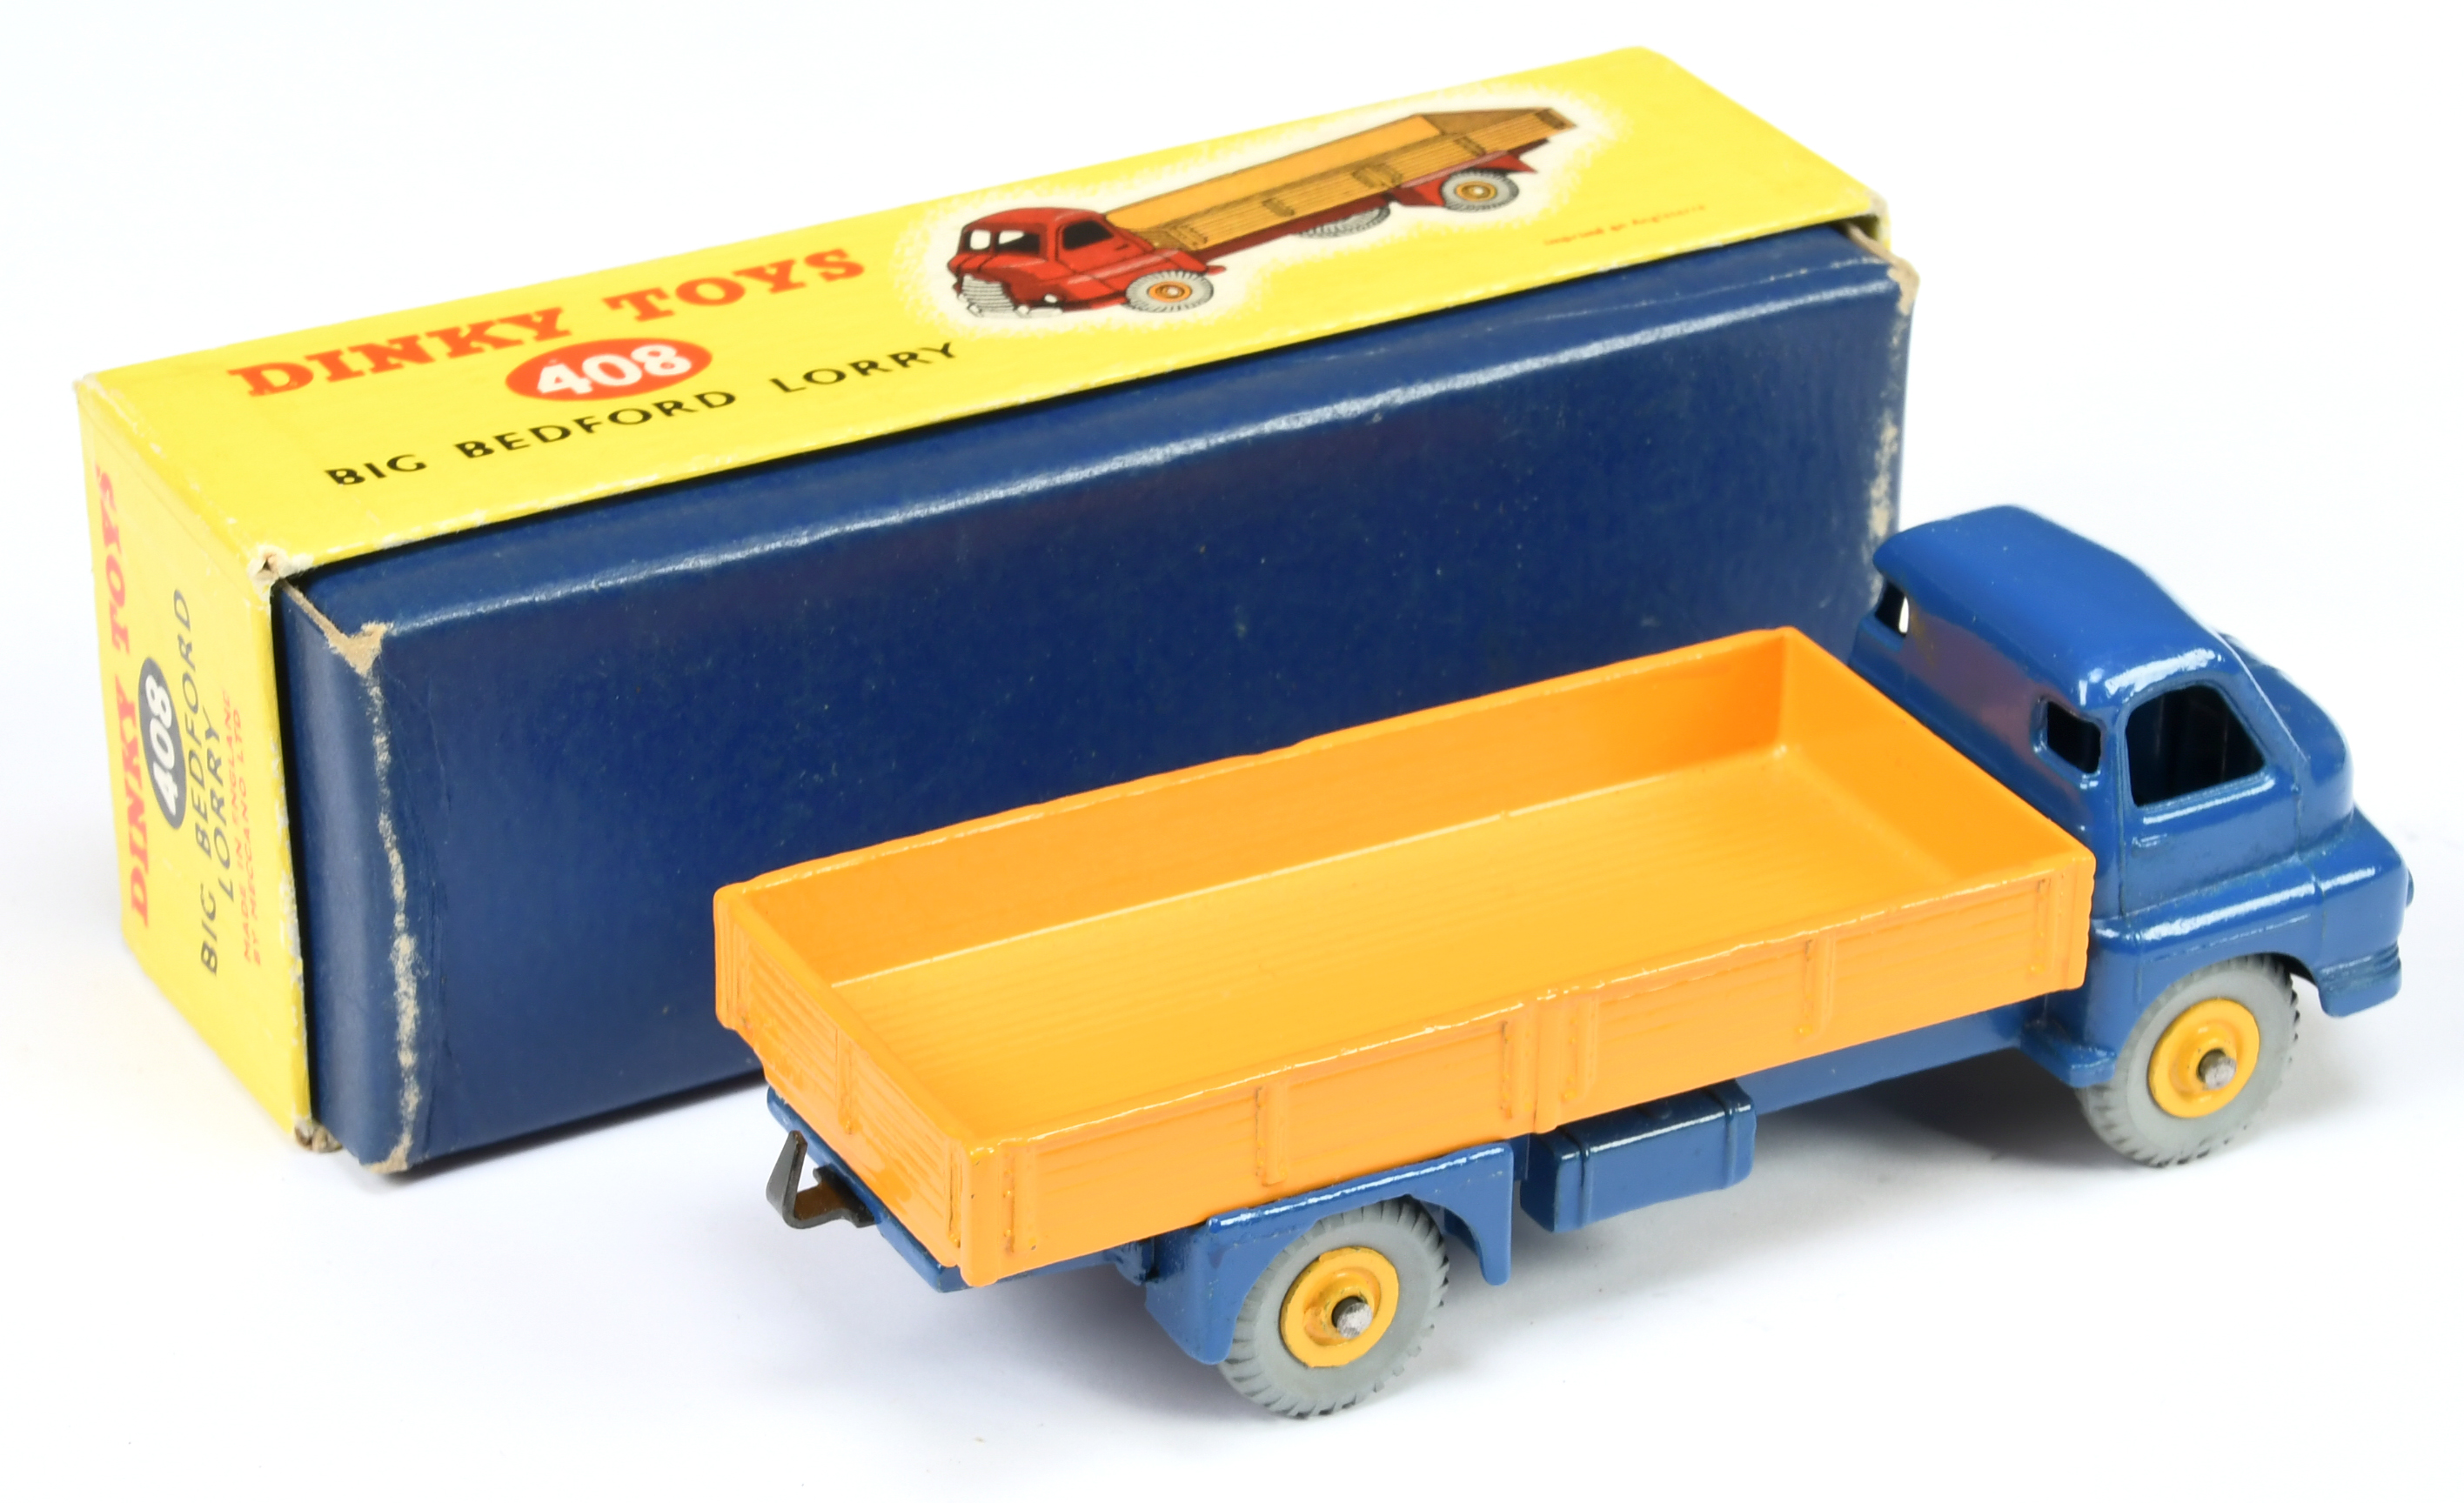 Dinky Toys 408 Big Bedford Lorry - Blue cab and chassis, deep yellow back, silver trim, bright ye... - Image 2 of 2